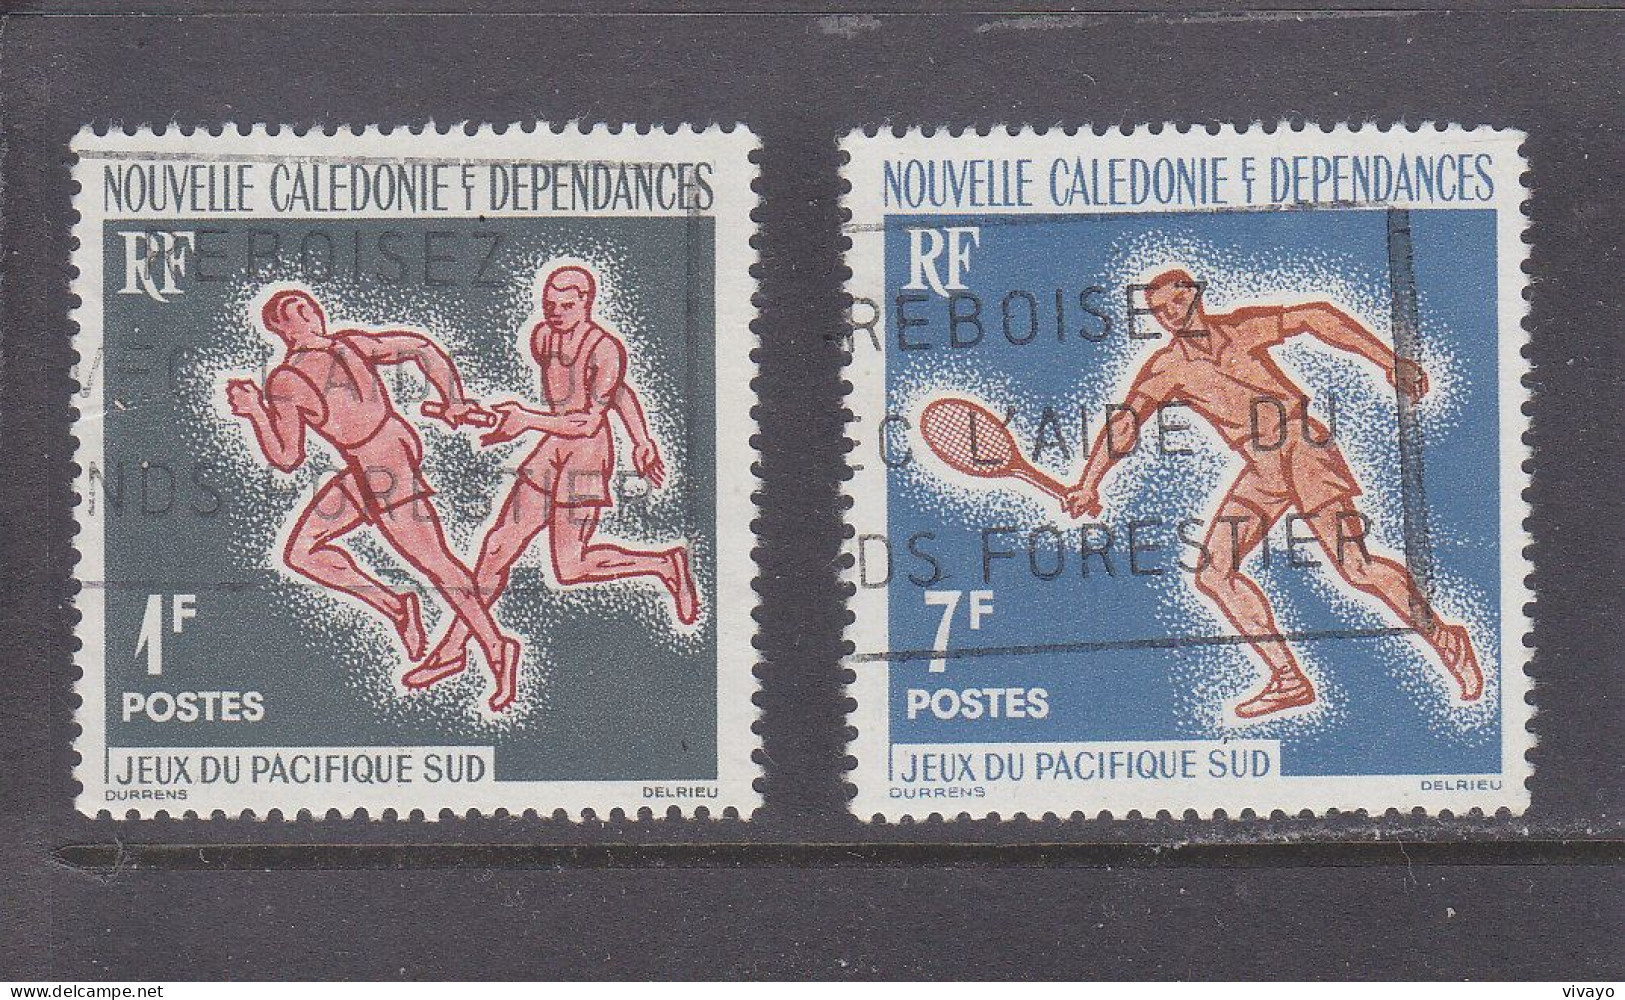 NOUVELLE CALEDONIE - O / FINE CANCELLED - 1963 - SOUTH PACIFIC GAMES -  Yv. 308/9  -   Mi. 388/9 - Gebraucht